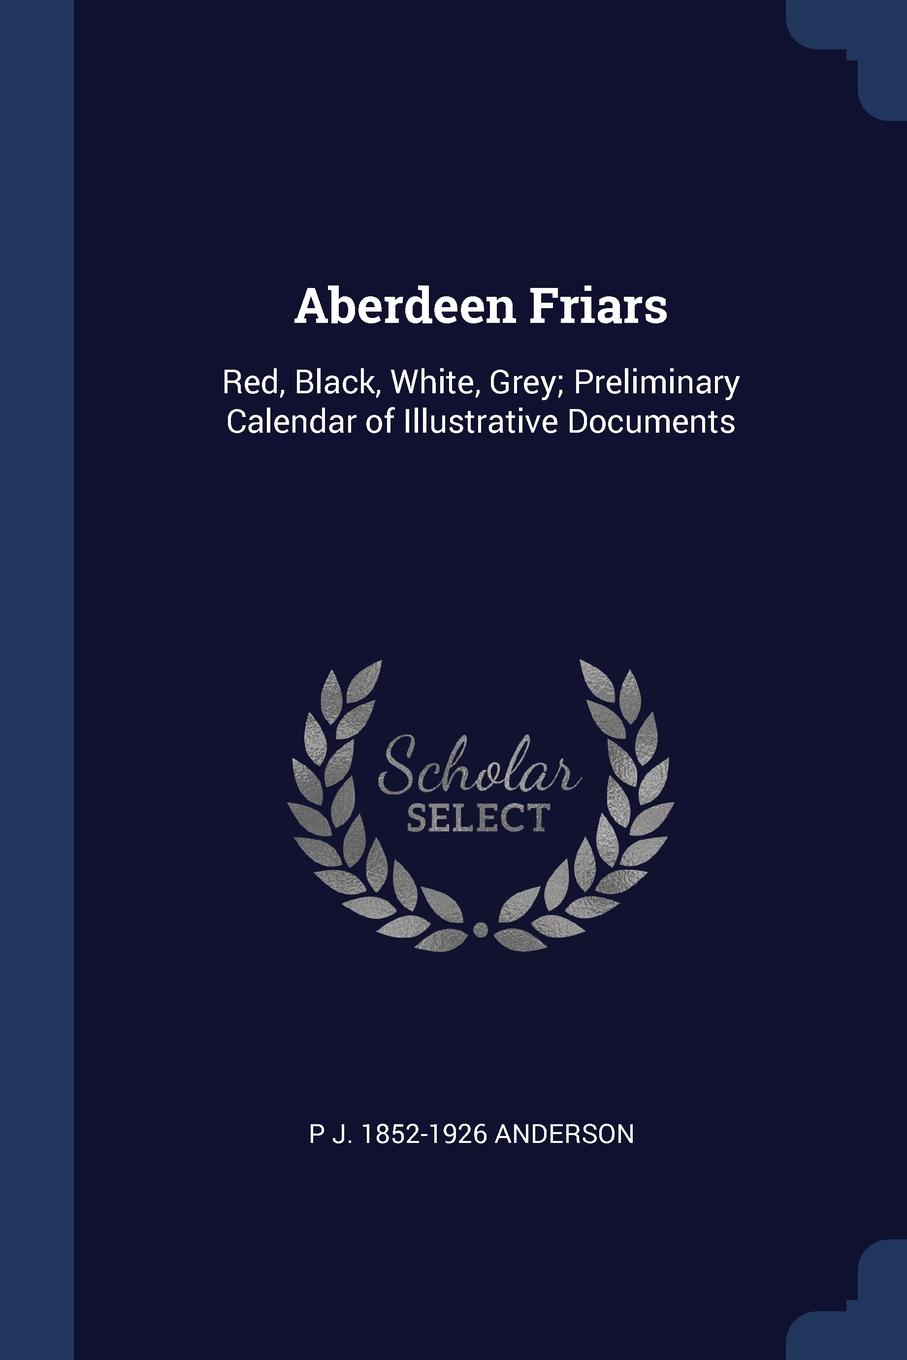 Aberdeen Friars. Red, Black, White, Grey; Preliminary Calendar of Illustrative Documents